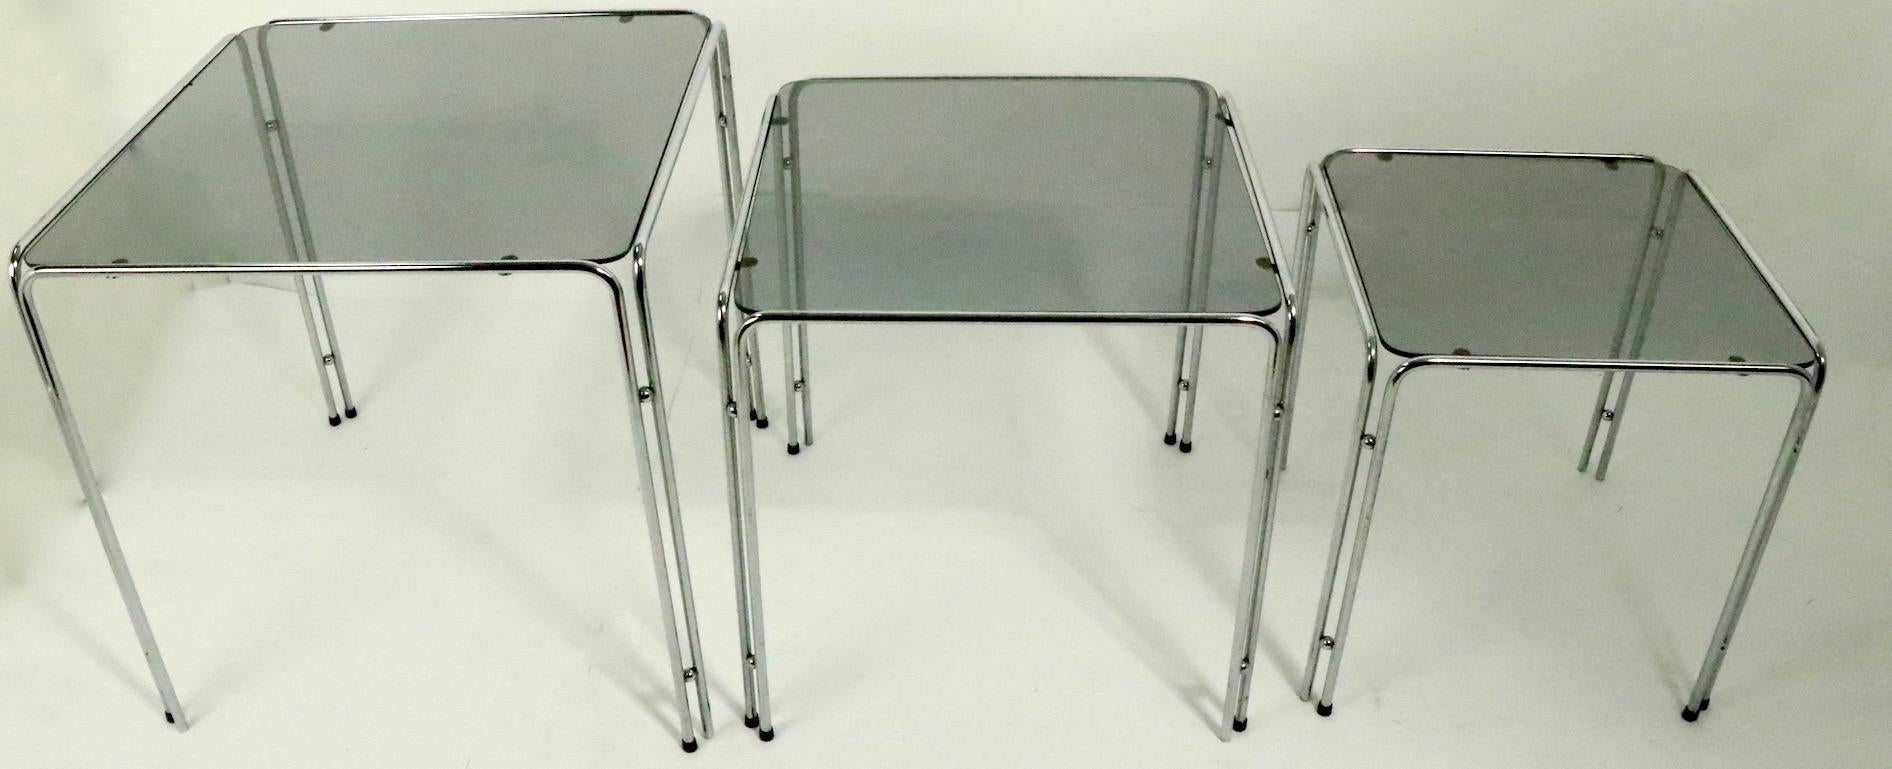 Chrome and Smoked Glass Nesting Tables after Baughman 2